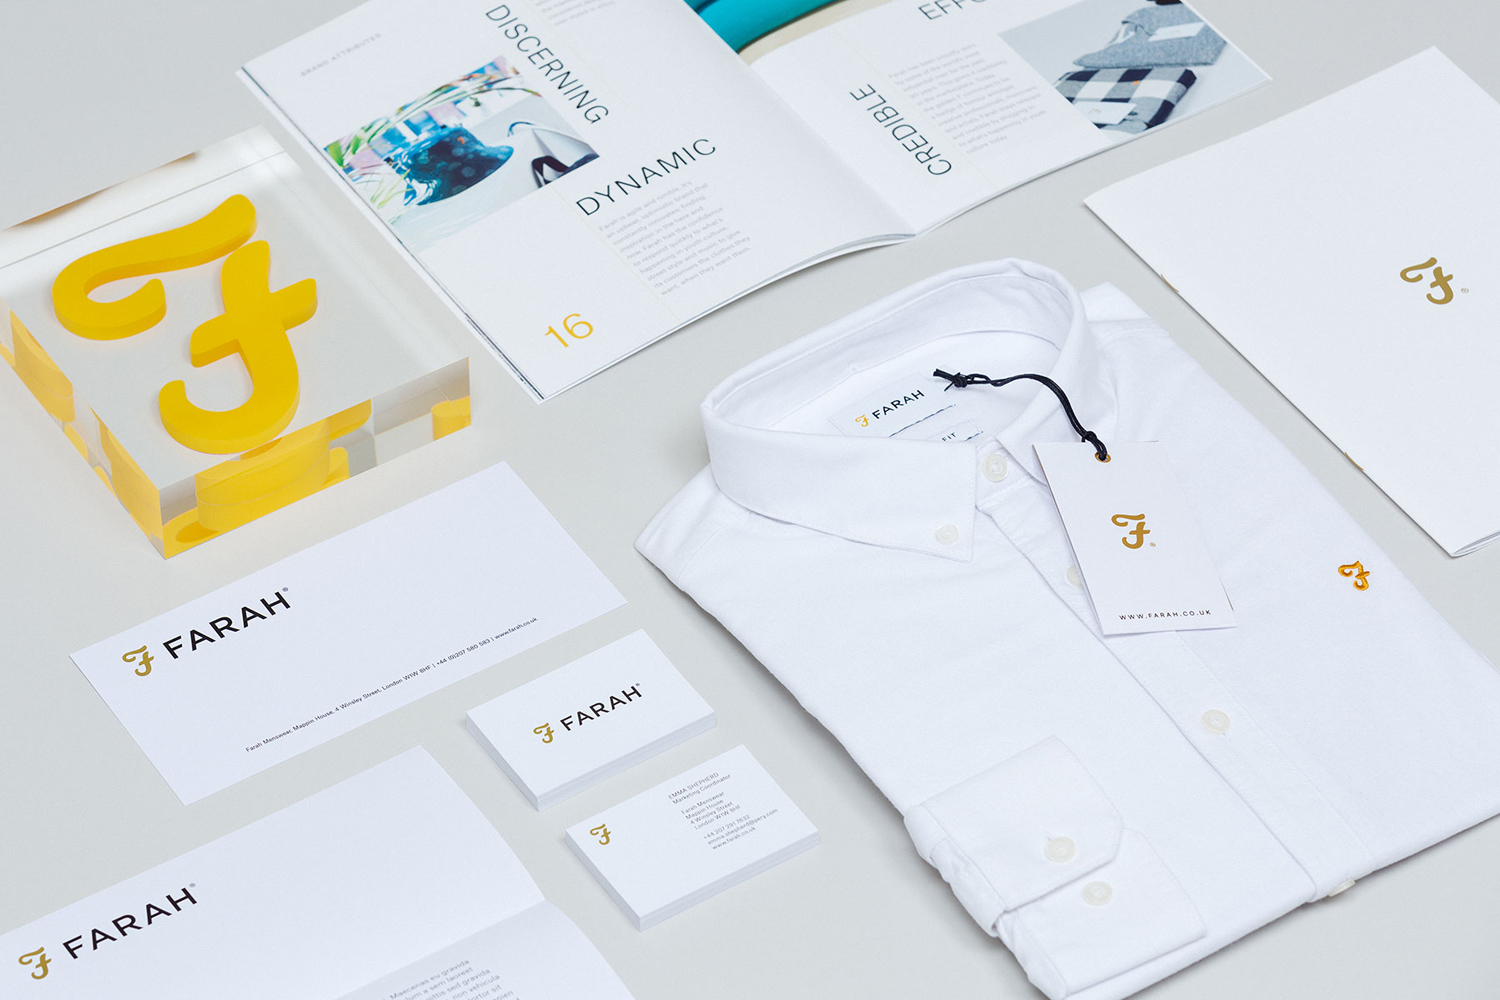 Brand identity, stationery and print communication for British fashion label Farah by graphic design studio Post